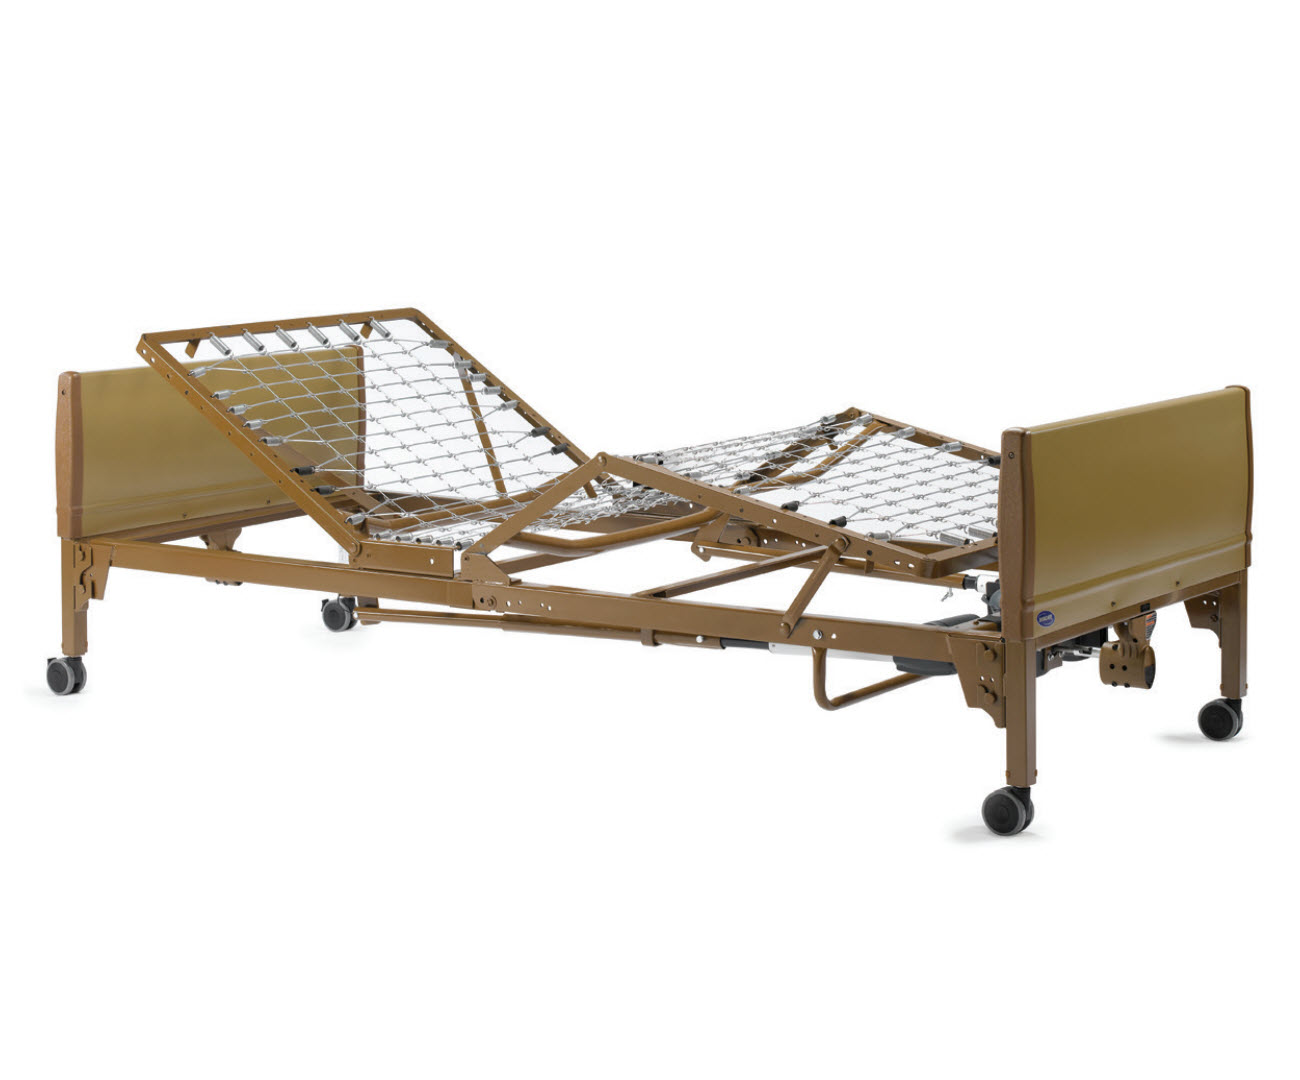 5000 ivc invacare hospital bed with mattress